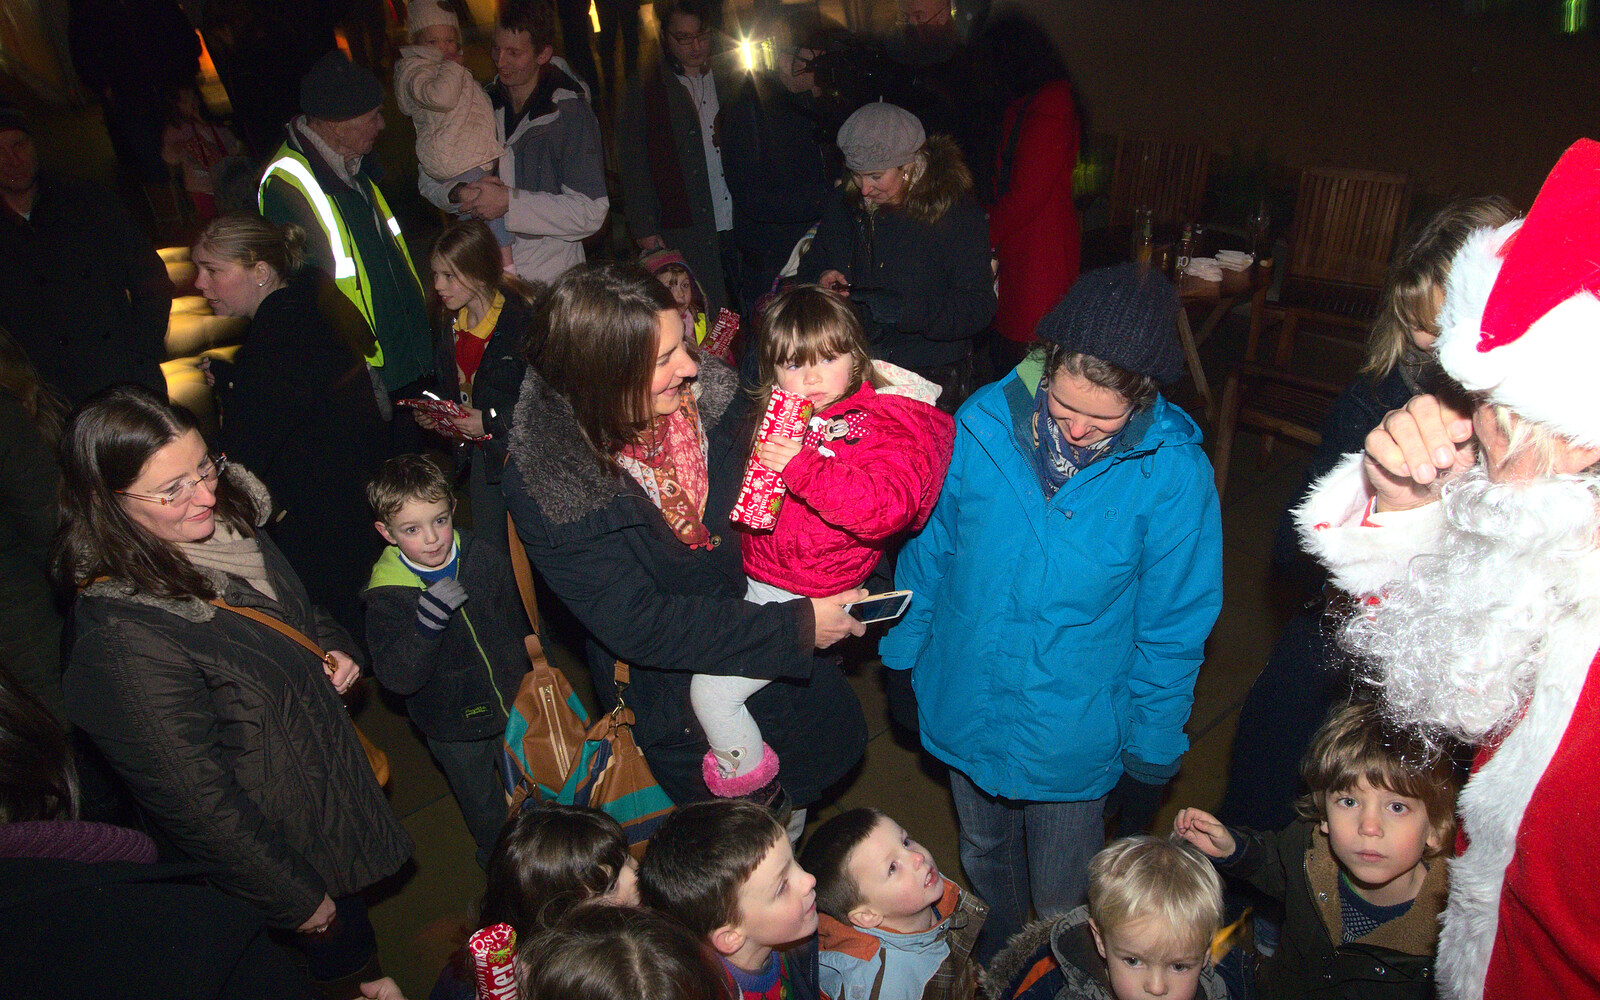 Isobel in the thick of it from Rick Wakeman, Ian Lavender and the Christmas lights, The Oaksmere, Suffolk - 4th December 2014